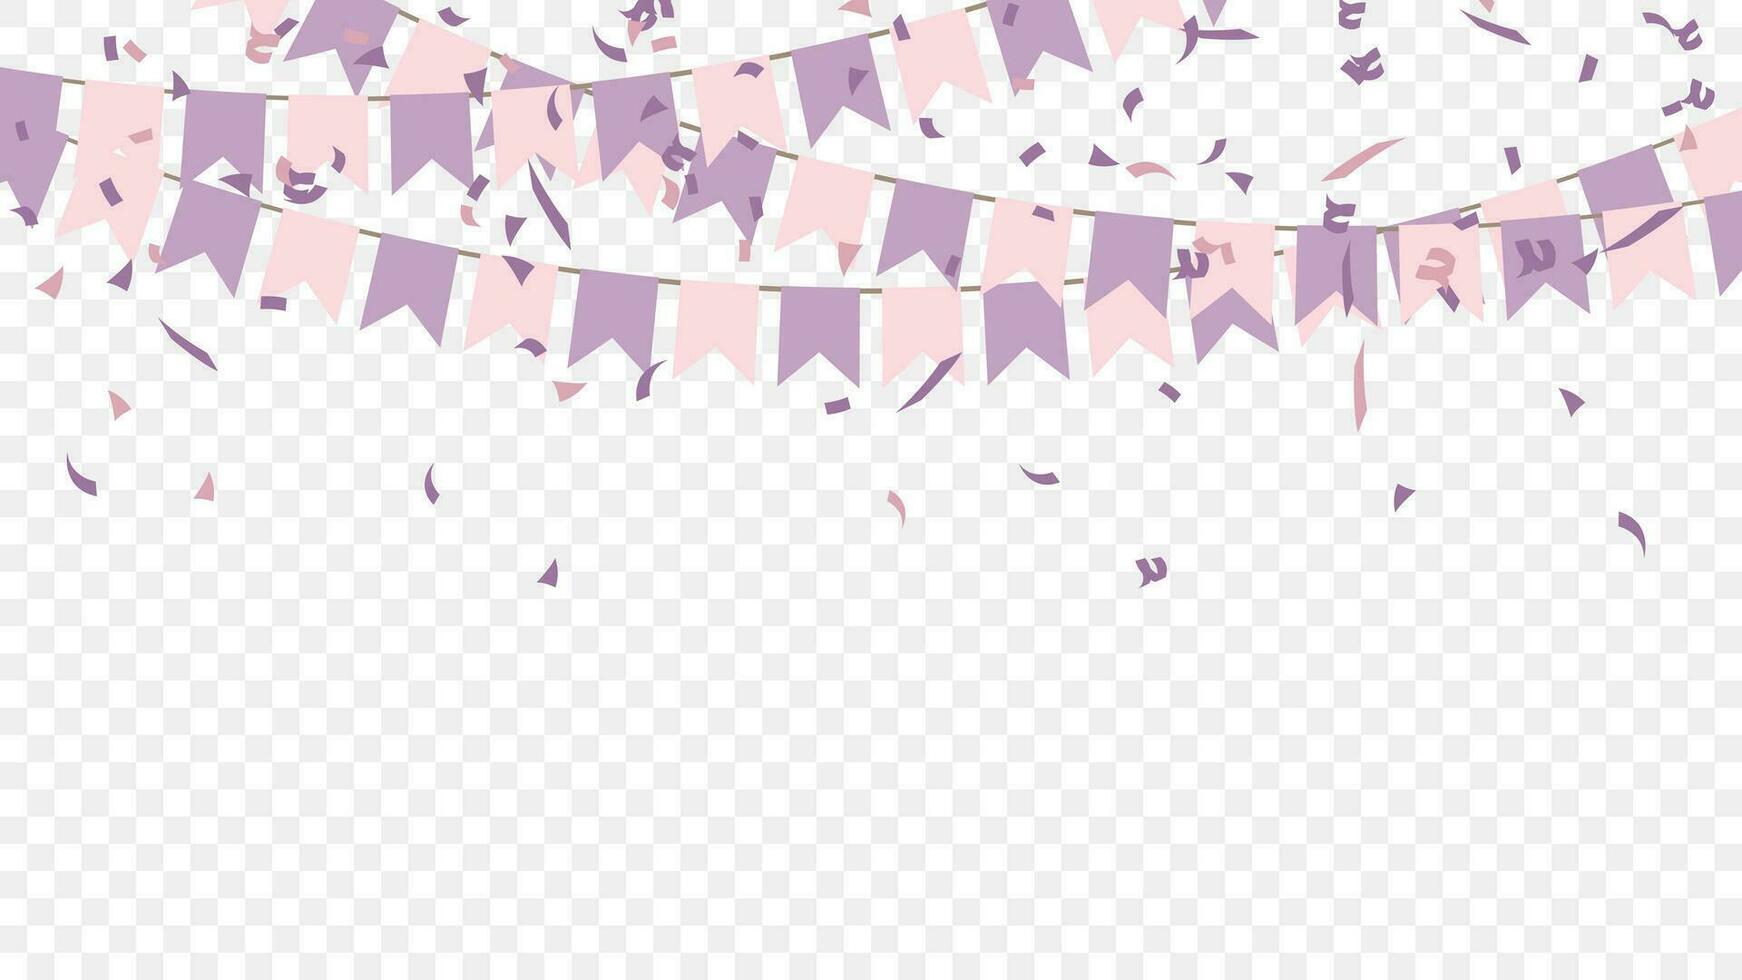 purple pink party flags with confetti falling. celebration and birthday. vector illustration